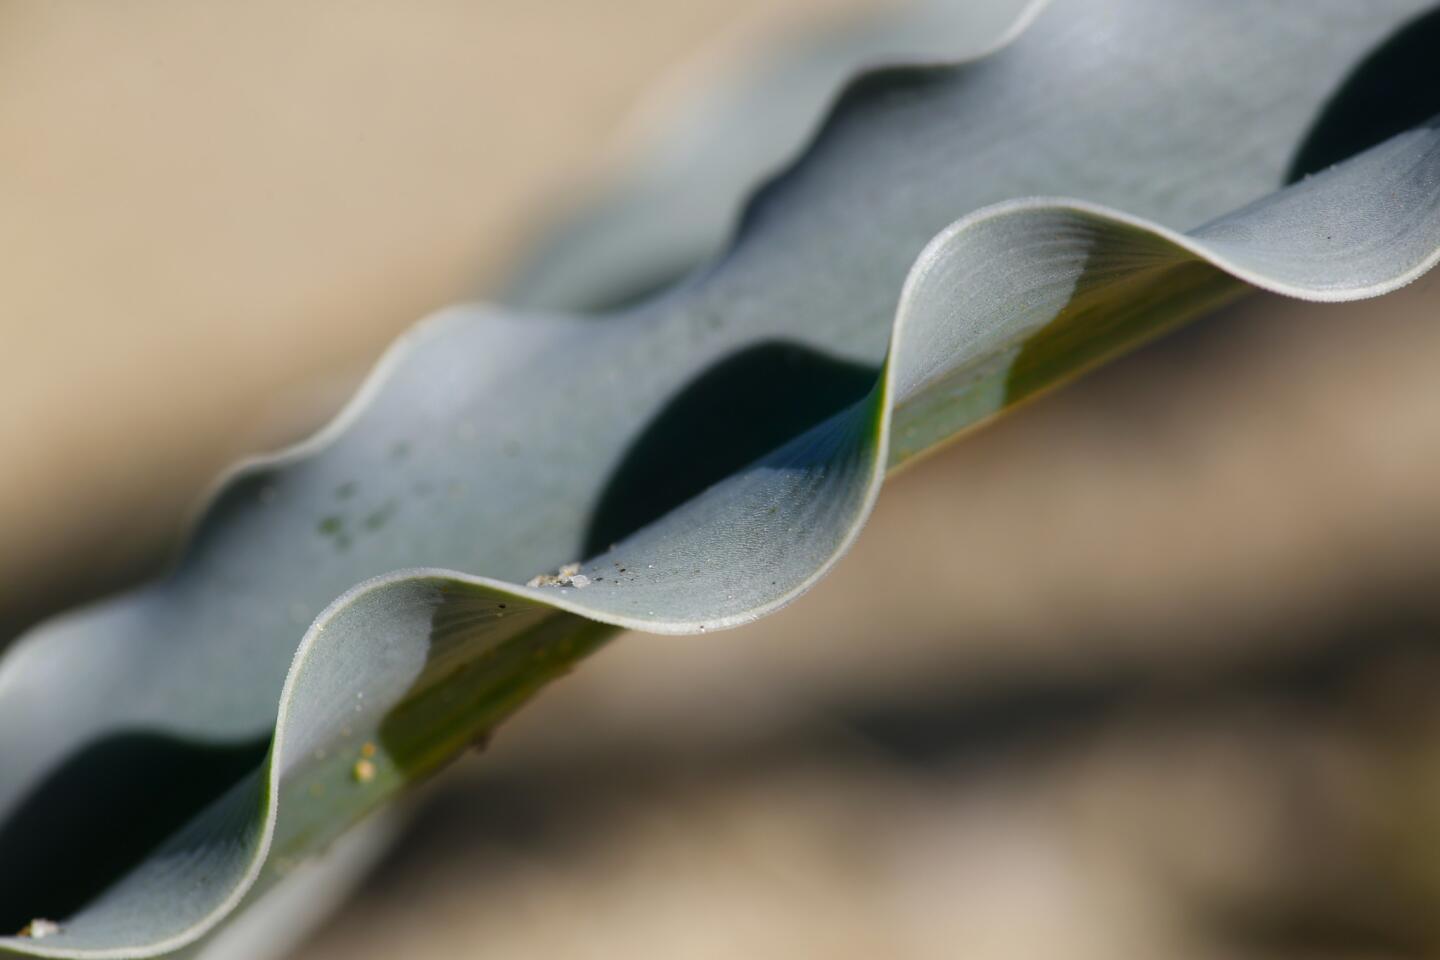 The long green leaf from a desert lily flowers at Anza-Borrego Desert.